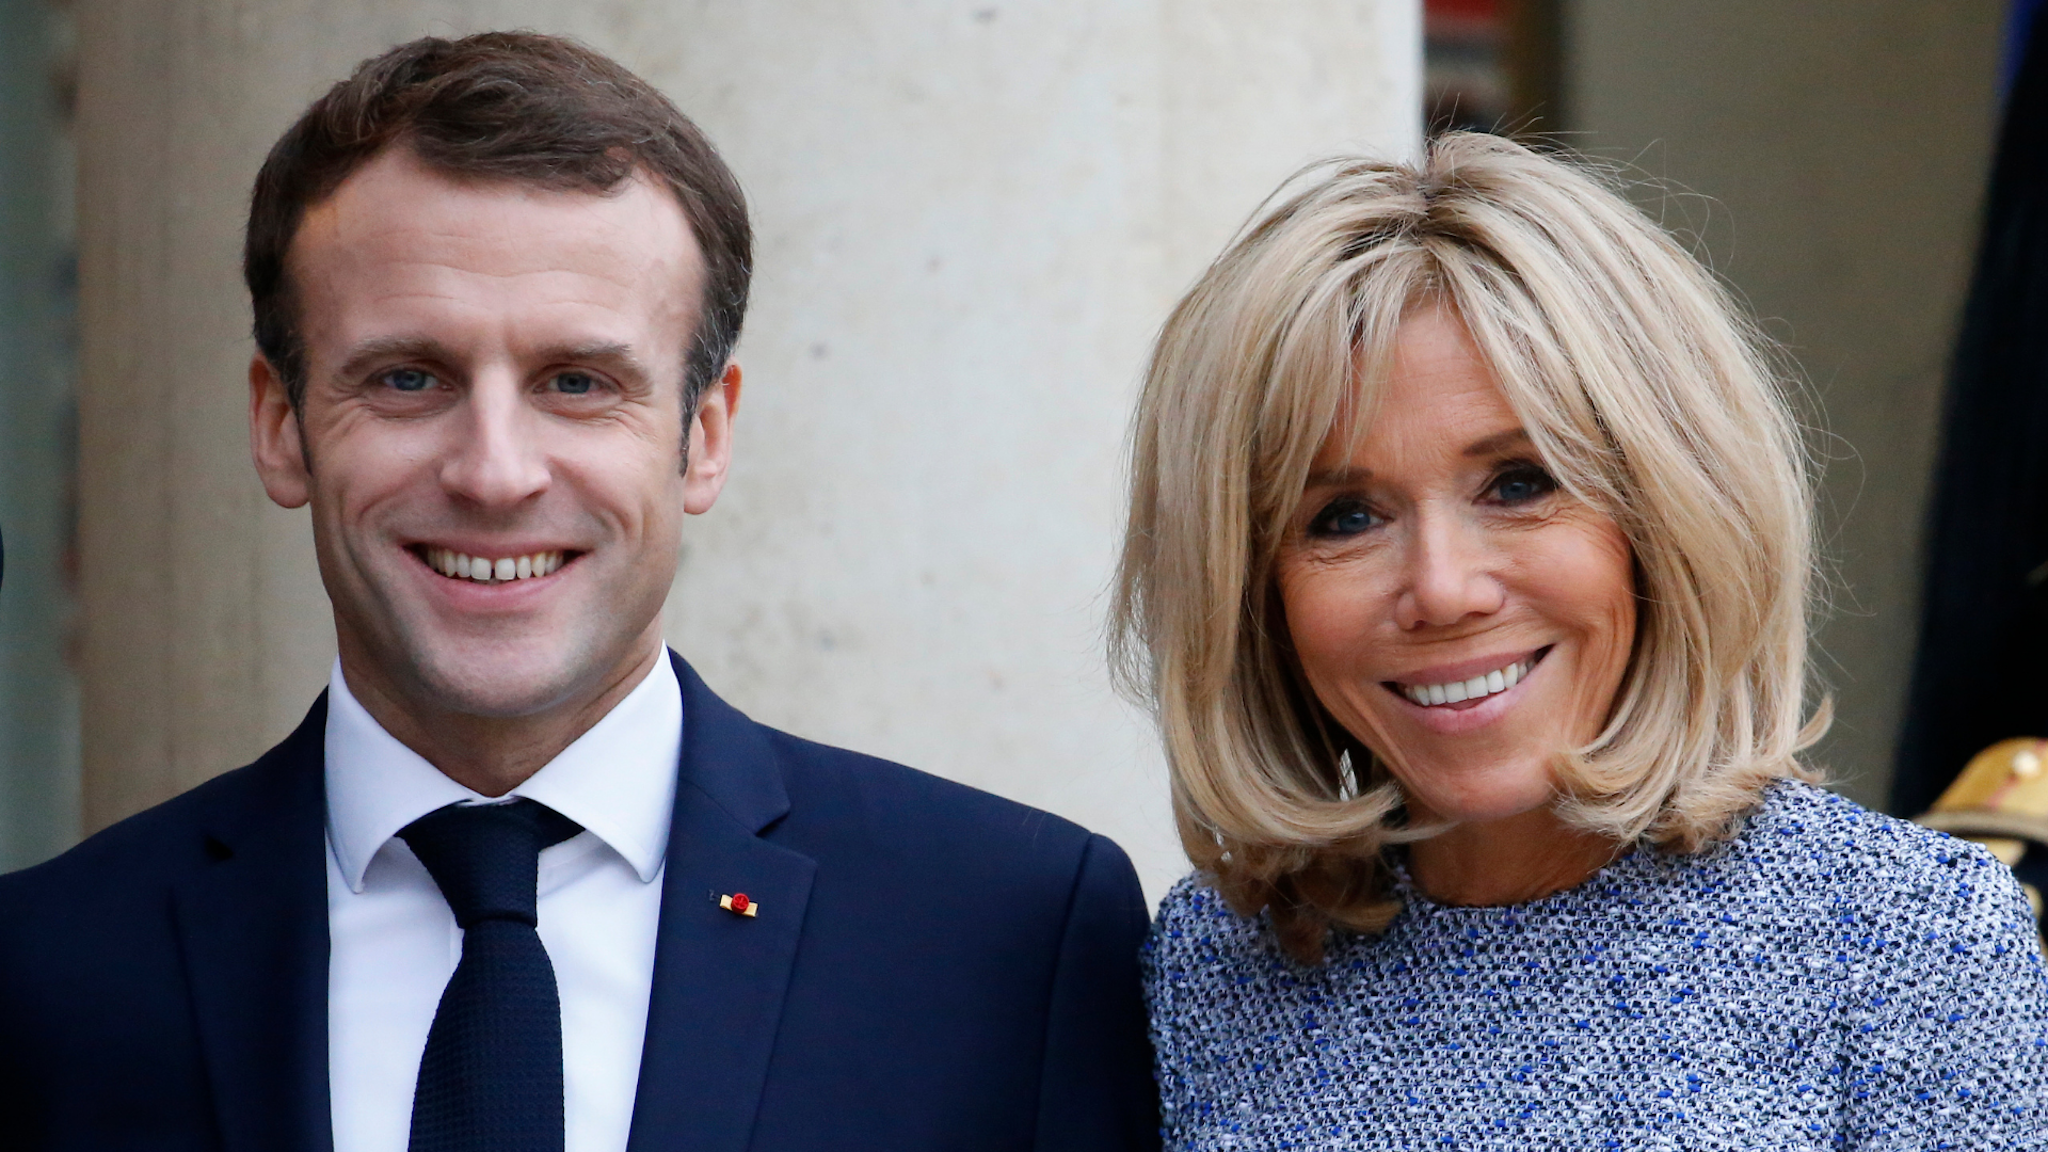 French President Emmanuel Macron and his wife Brigitte Macron accompany Romanian President Klaus Iohannis and his Carmen Iohannis (not seen) after their meeting at the Elysee Presidential Palace on November, 27 2018, in Paris, France.